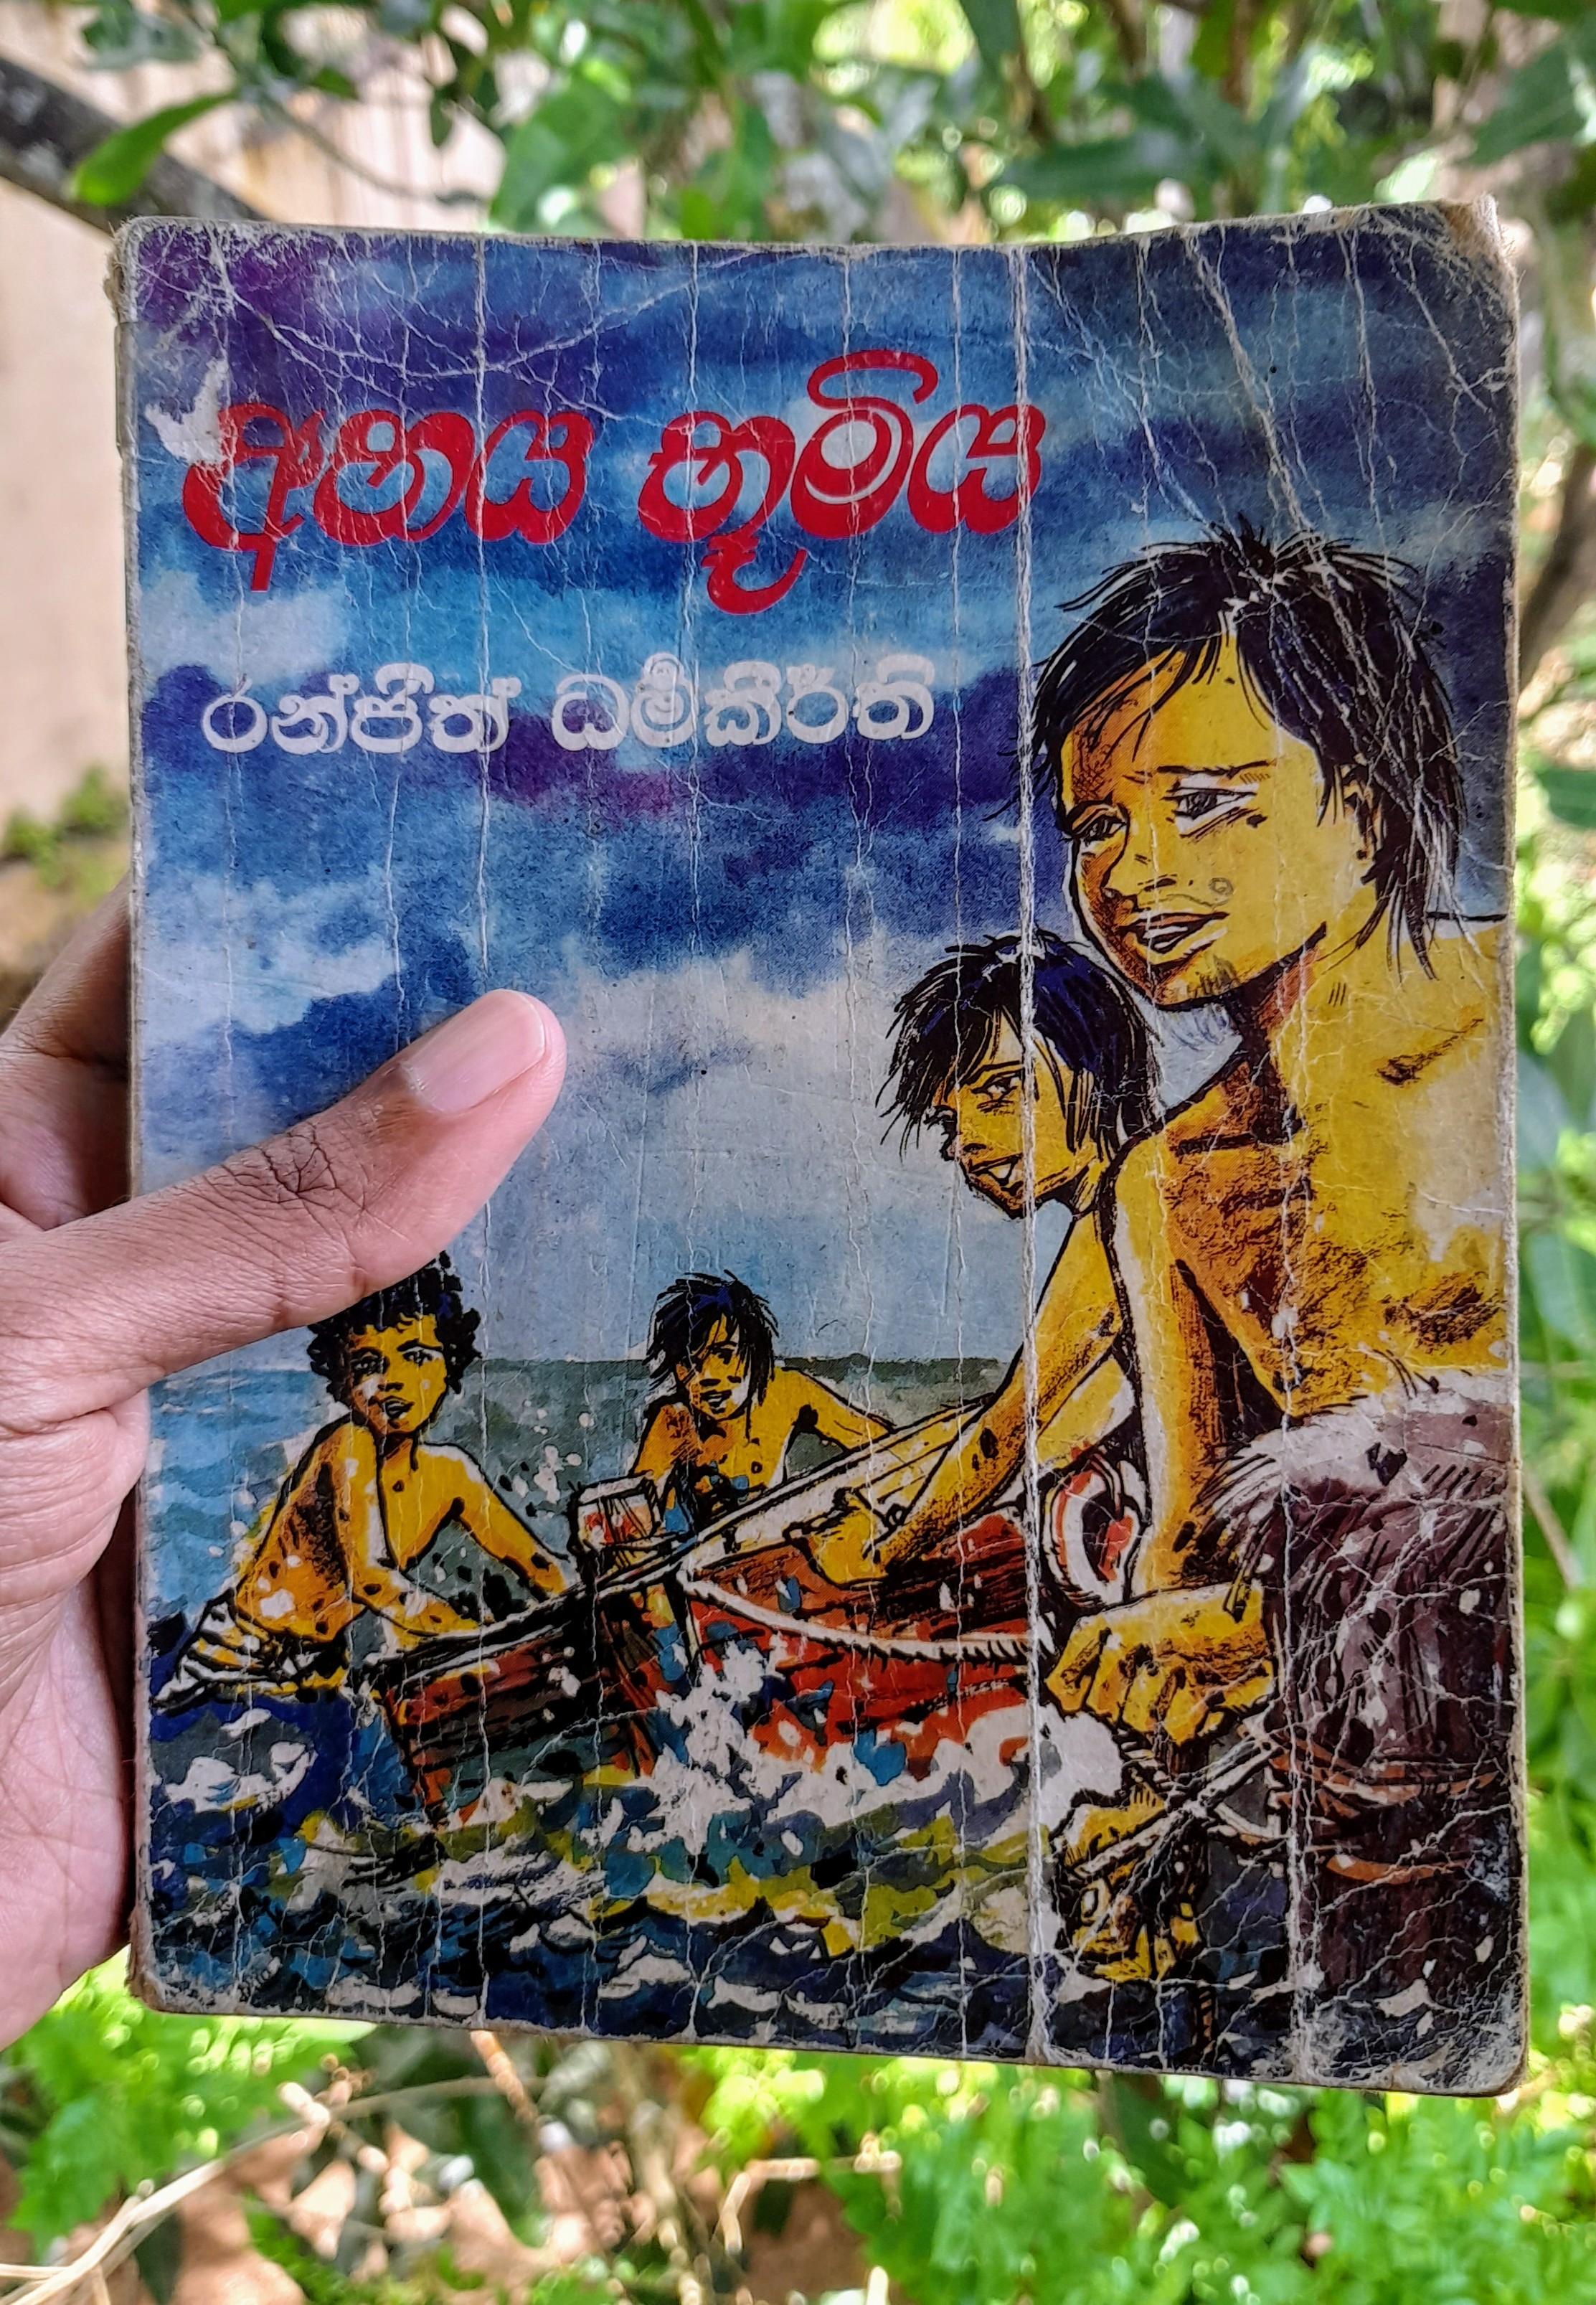 An old book held by a hand. The book cover is worn out and looks very old. The cover depicts a a drawing of 4 young boys  on water. The book cover and author name is written in Sinhala language that reads "අභය භූමිය", meaning sanctuary. The author is Ranjit Dharmakeerthi. There is greenery in the background.